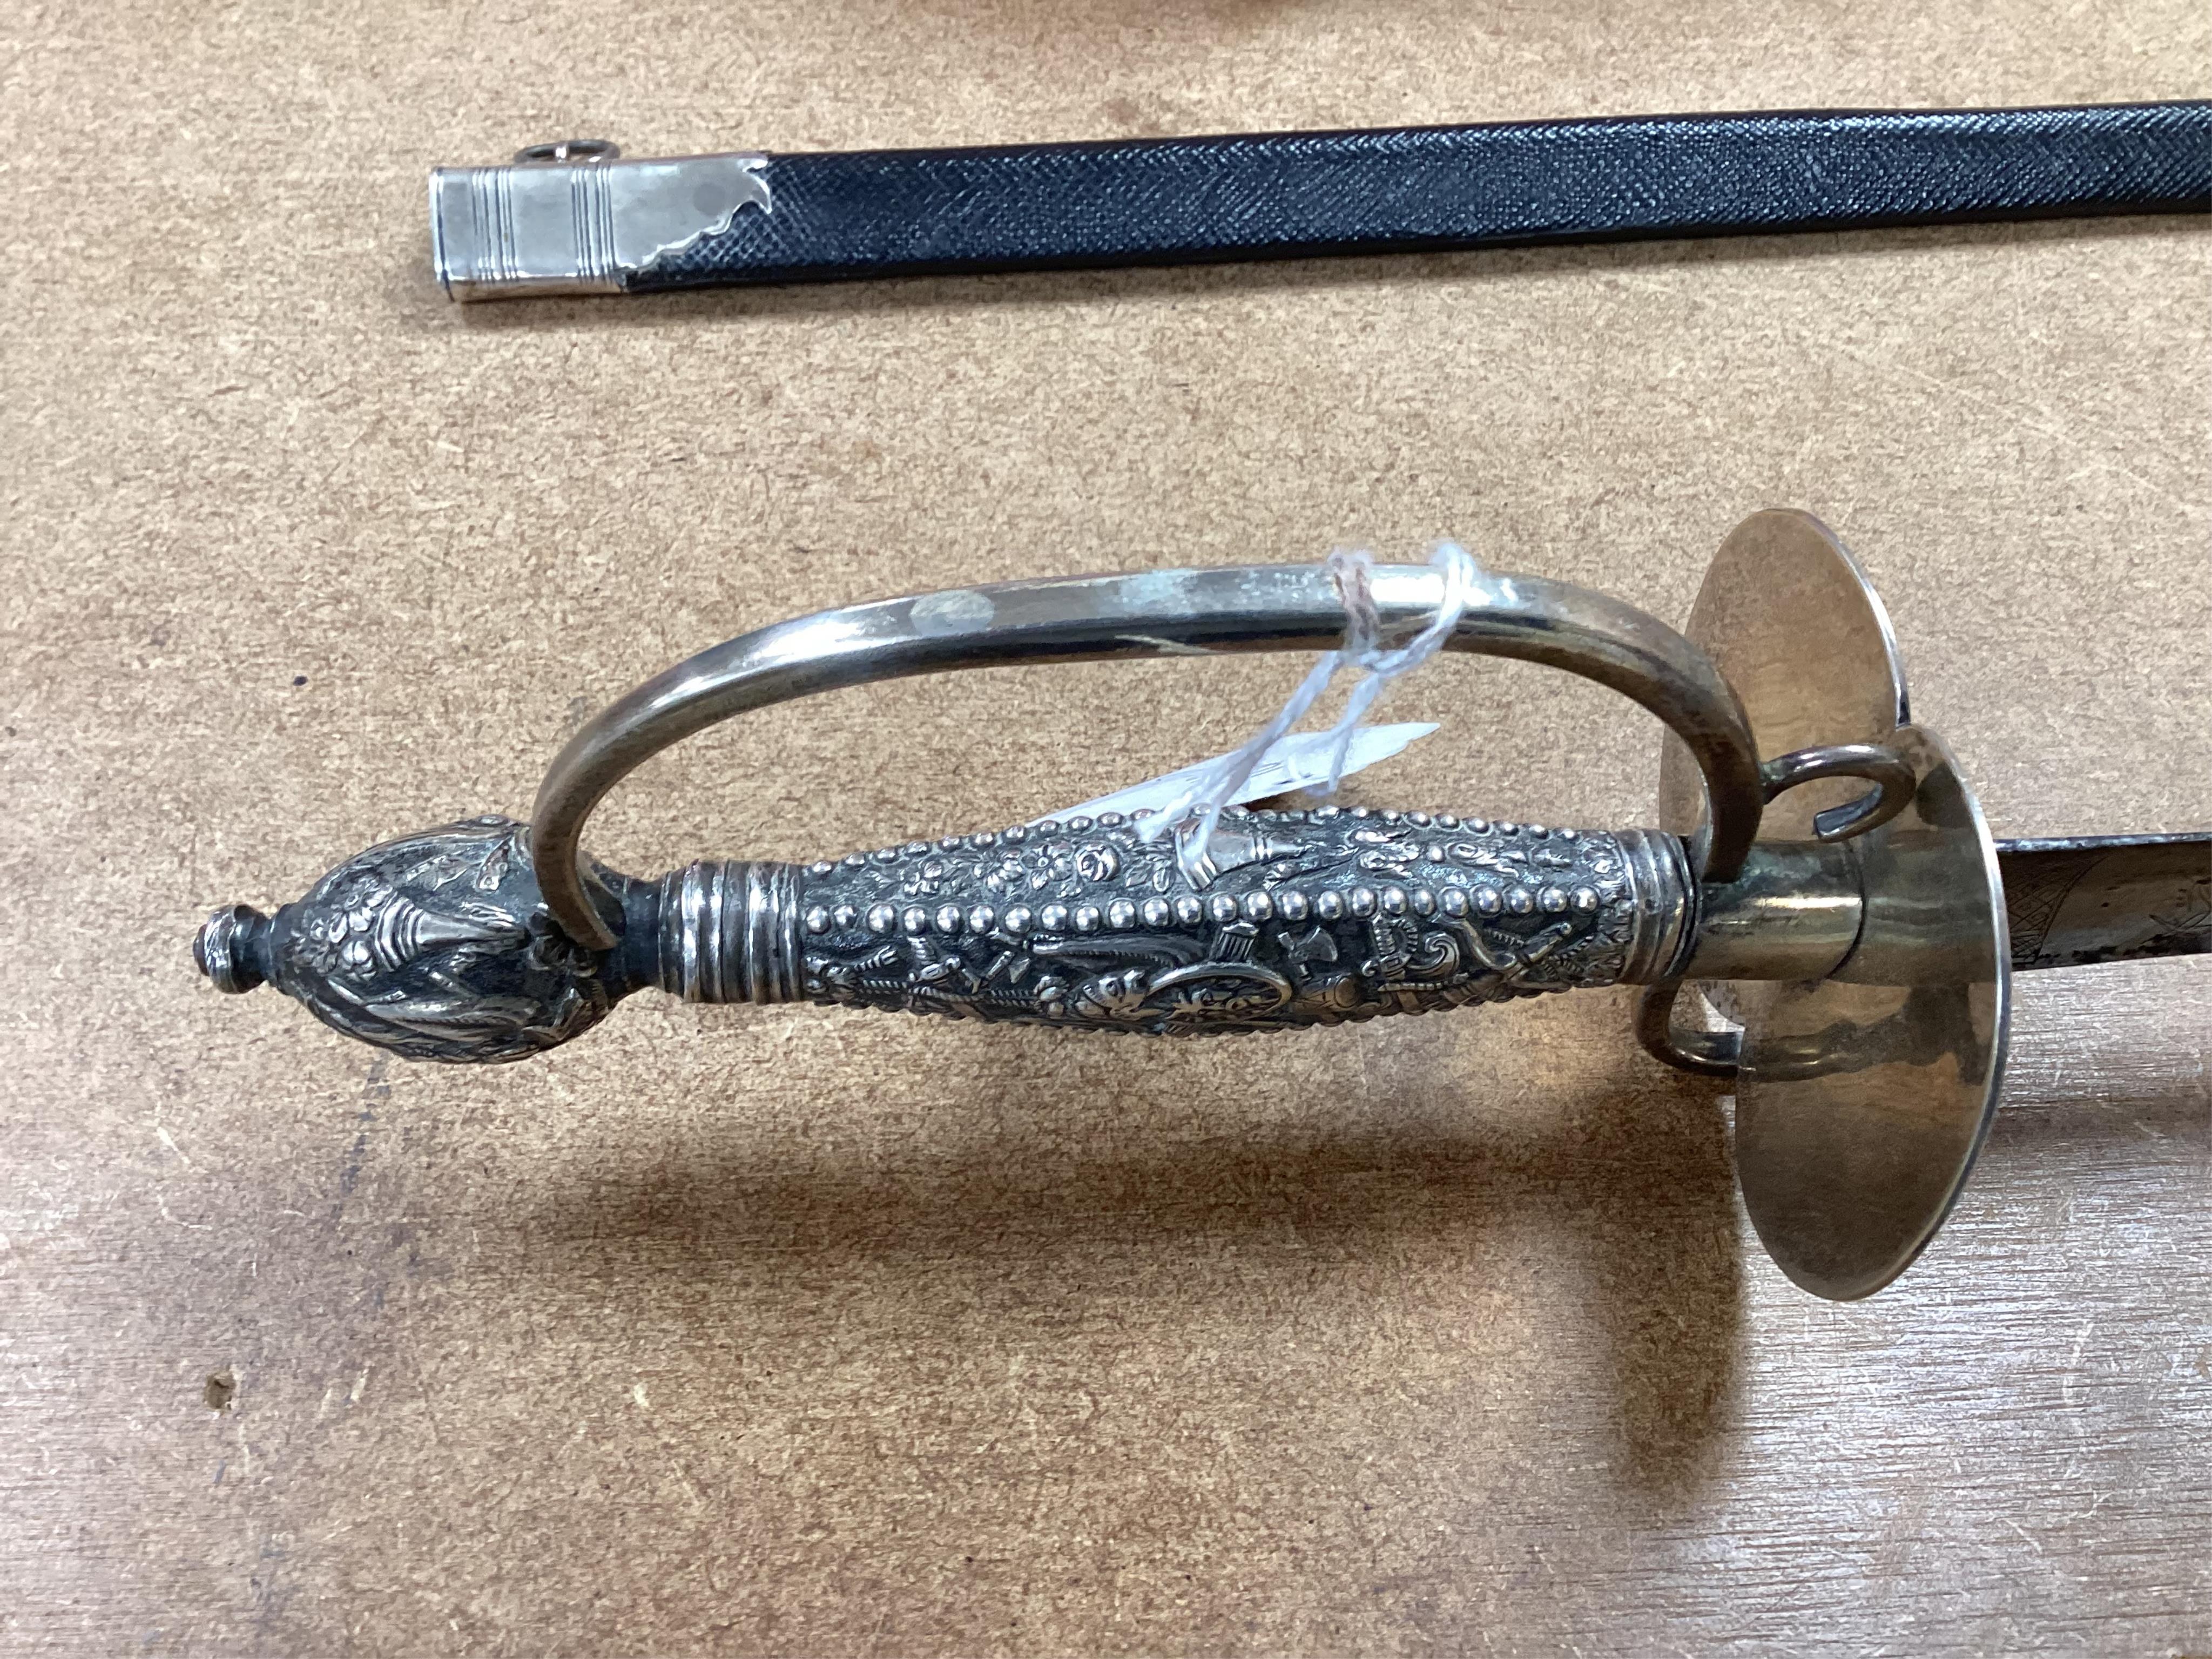 A late 18th century court sword with white metal grip, knuckle guard and mounts, decoration to scabbard band believe to be based on Admiral Duncan’s crest (Camperdown 1797), blade 84cm. Condition - fair to good, some wea